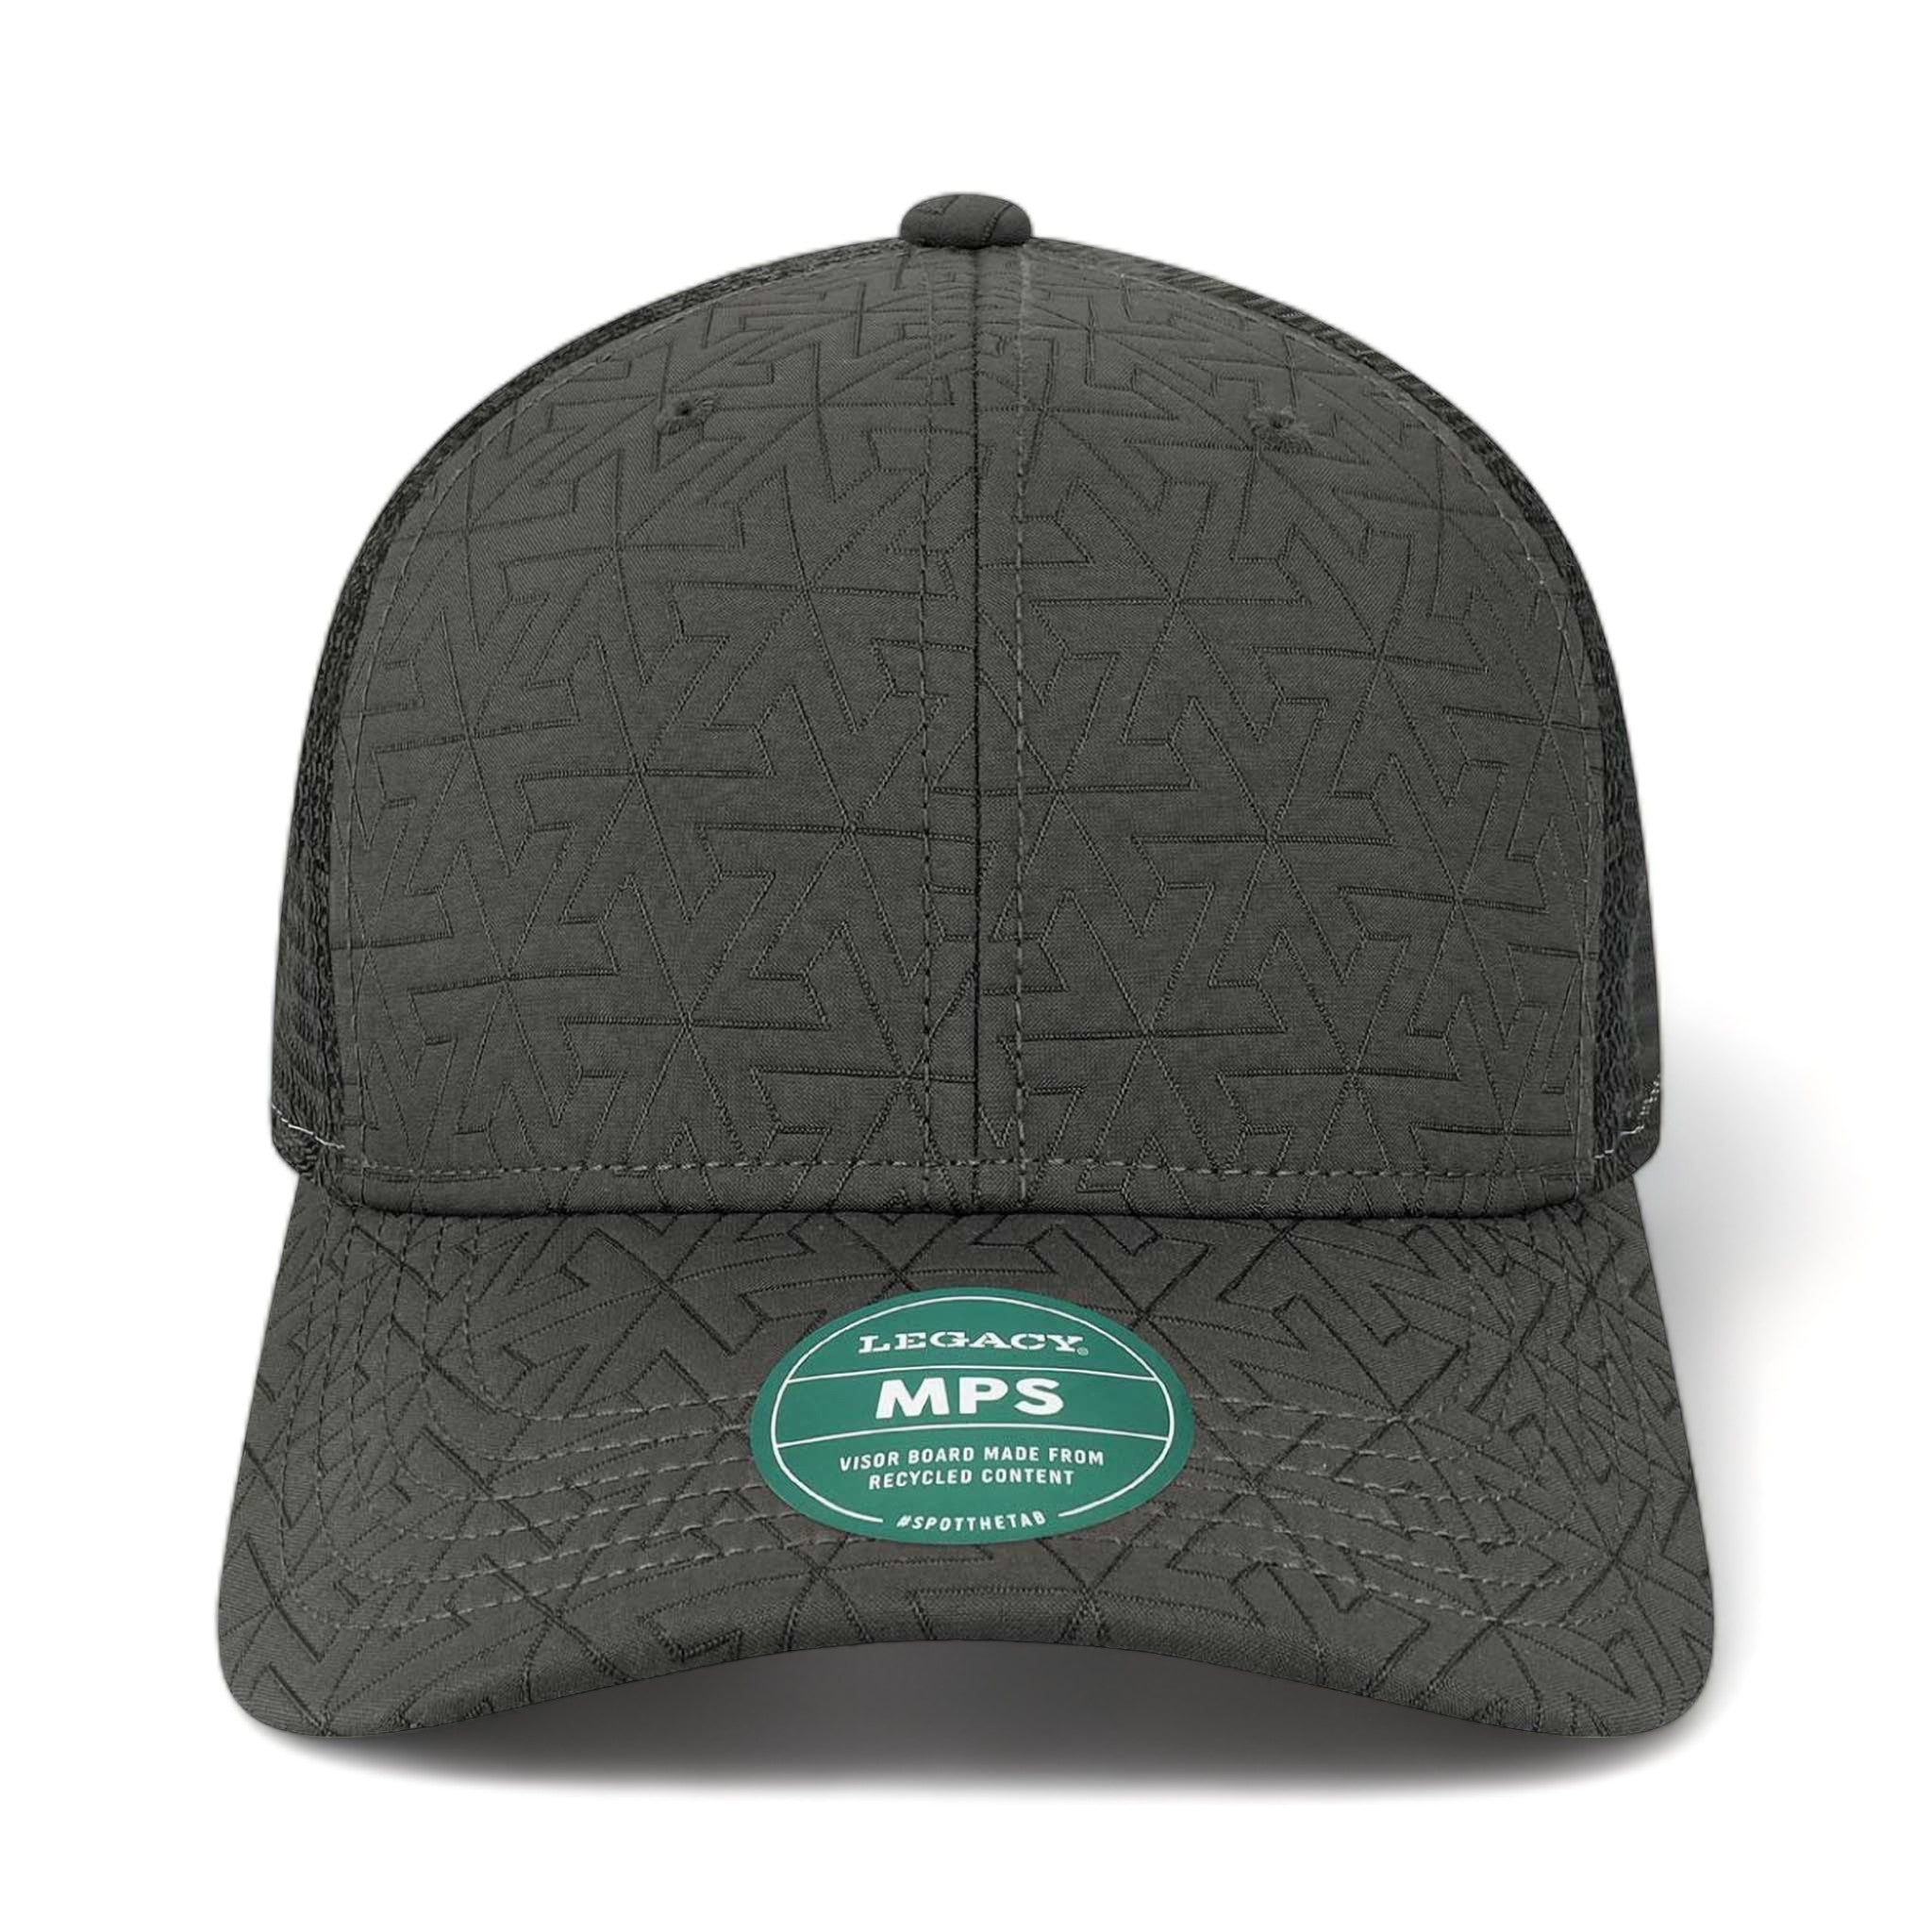 Front view of LEGACY MPS custom hat in black z - quilted